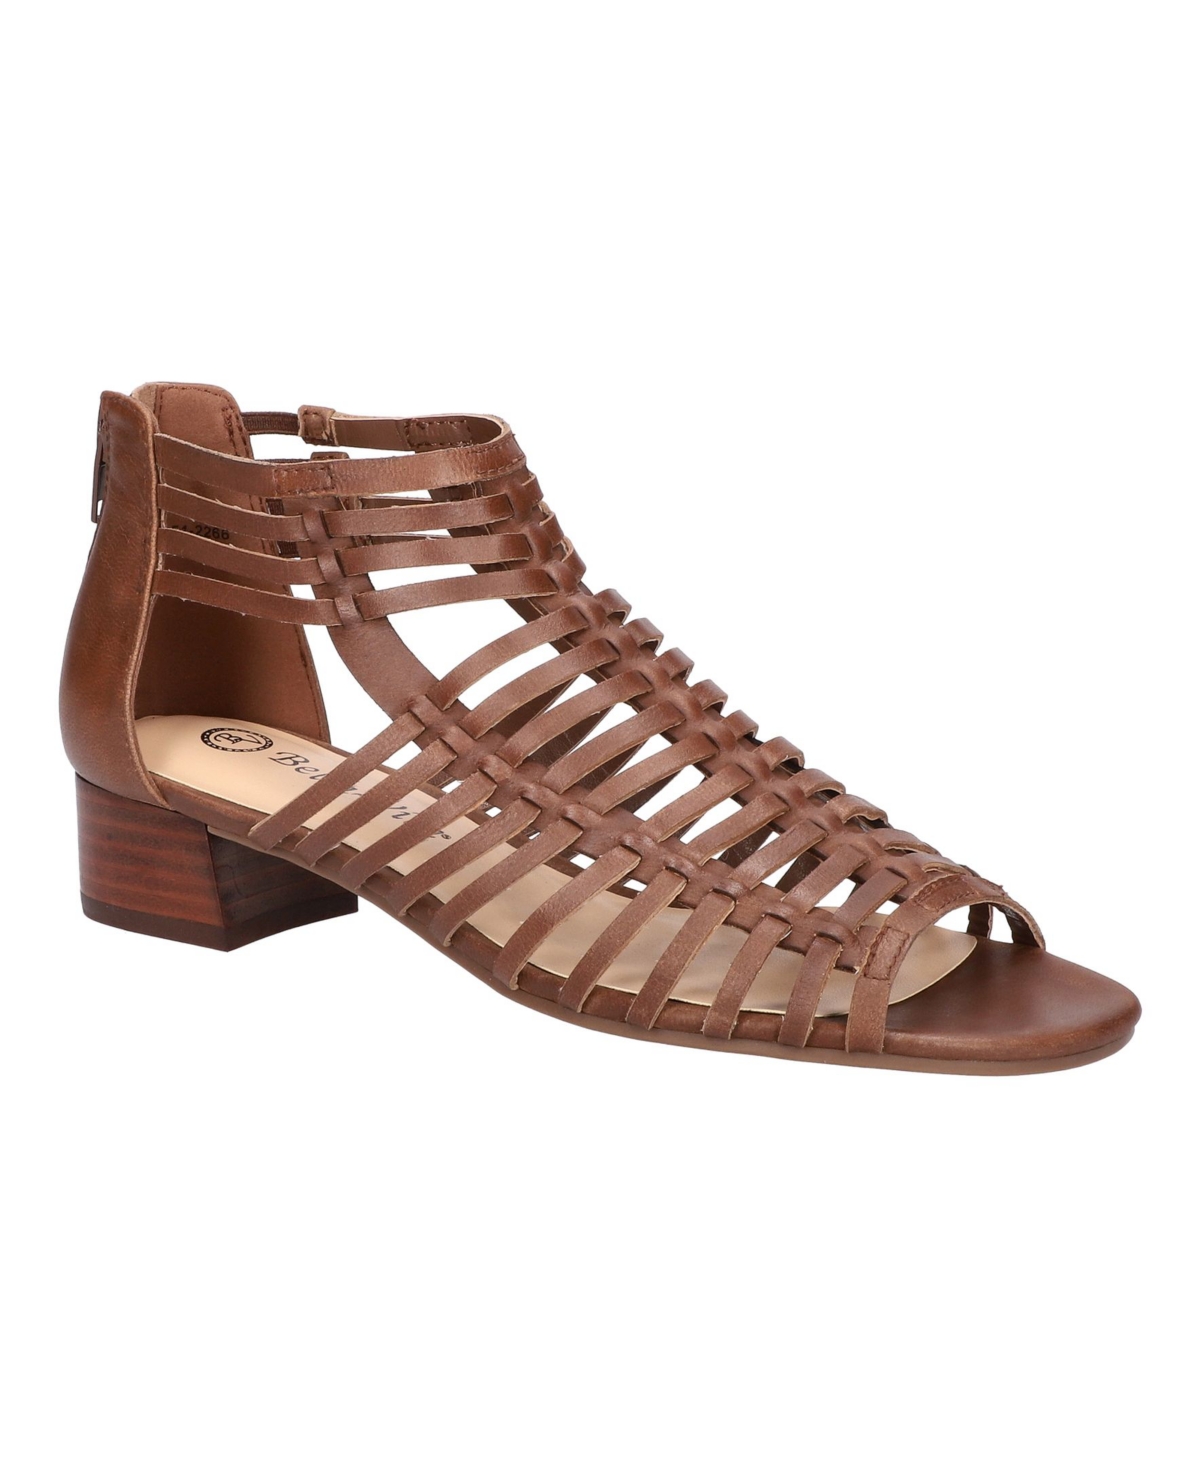 Women's Holden Block Heeled Strappy Sandals - Camel Leather